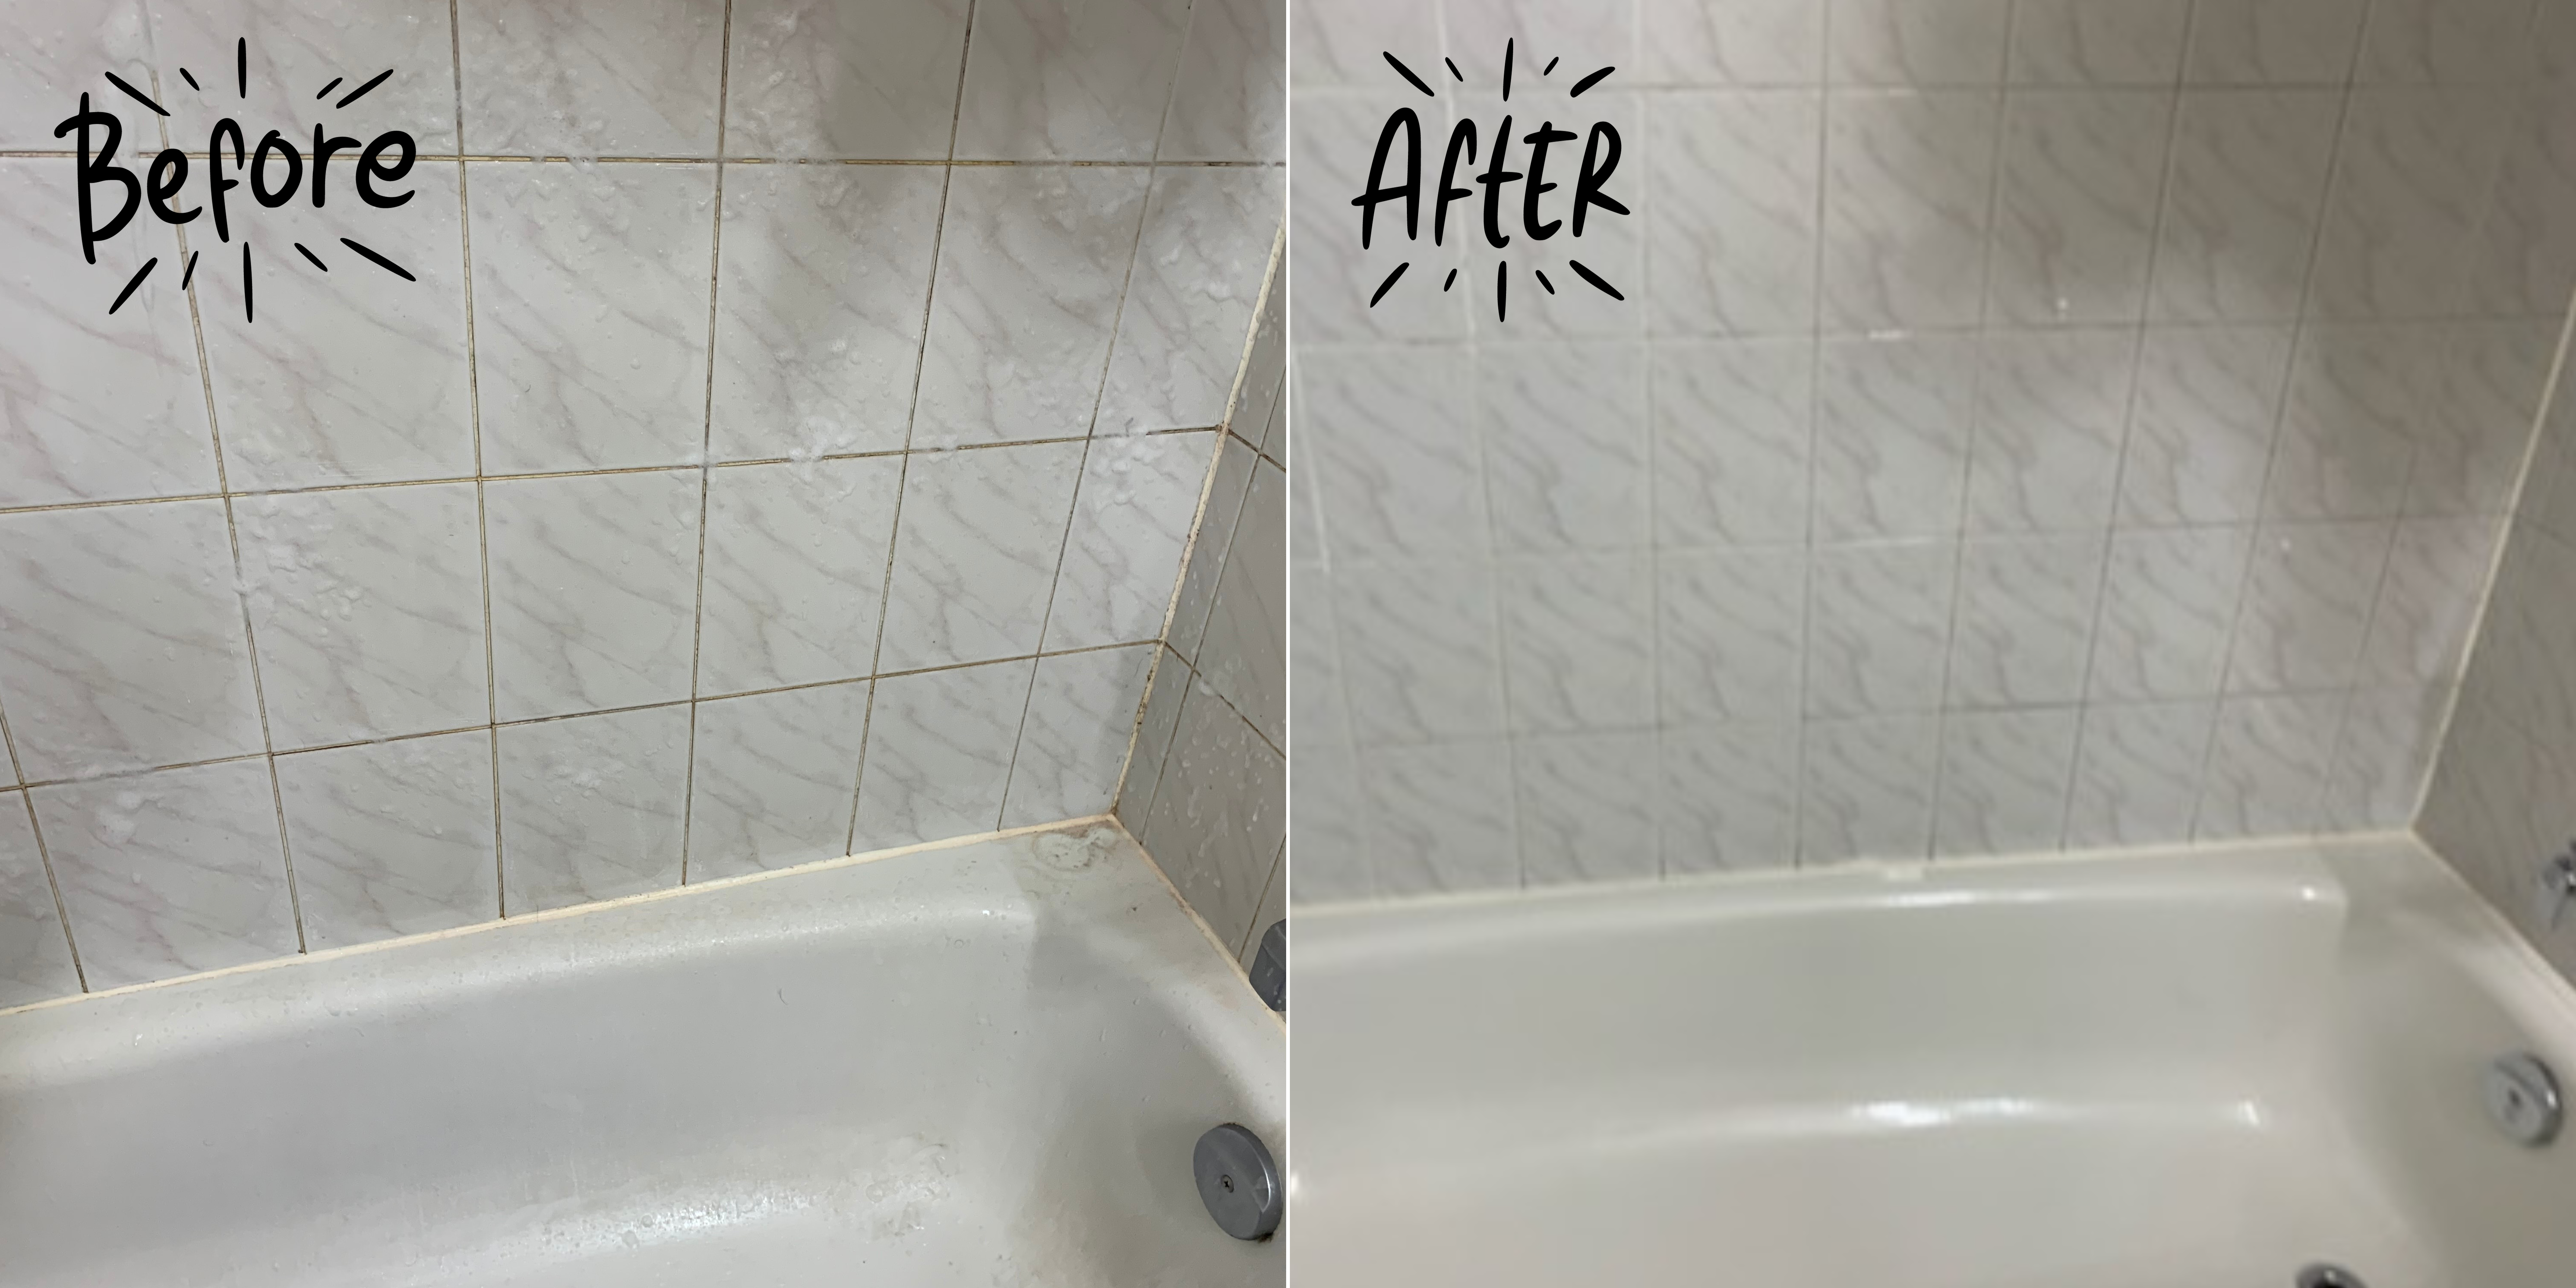 A before and after picture of the bathtub.